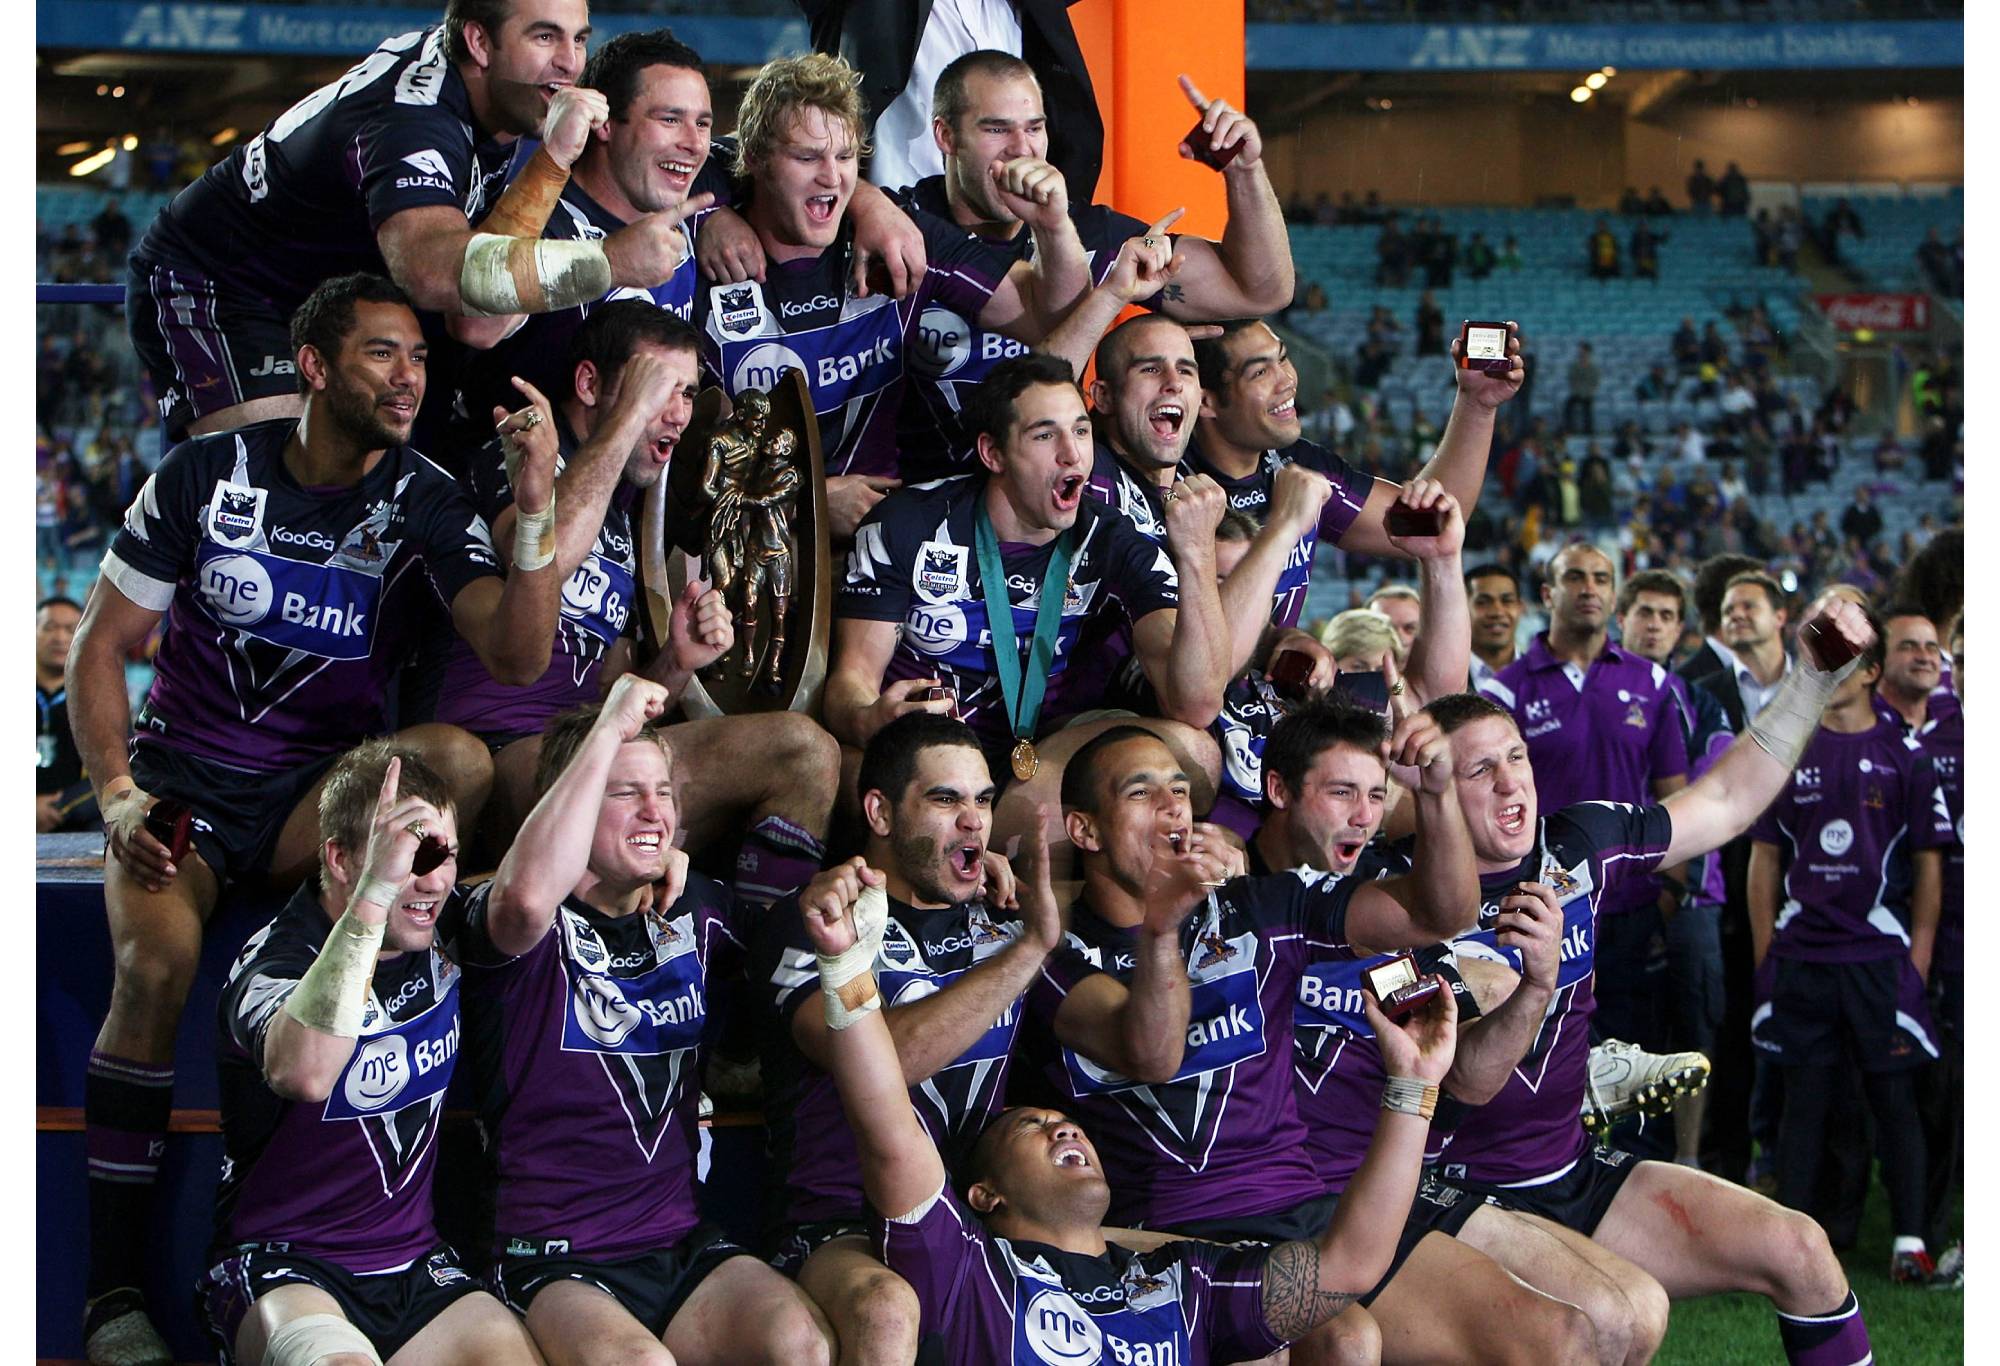 SYDNEY, AUSTRALIA - OCTOBER 04:  The Melbourne Storm team celebrate with the trophy after winning the 2009 NRL Grand Final match between the Parramatta Eels and the Melbourne Storm at ANZ Stadium on October 4, 2009 in Sydney, Australia.  (Photo by Mark Kolbe/Getty Images)